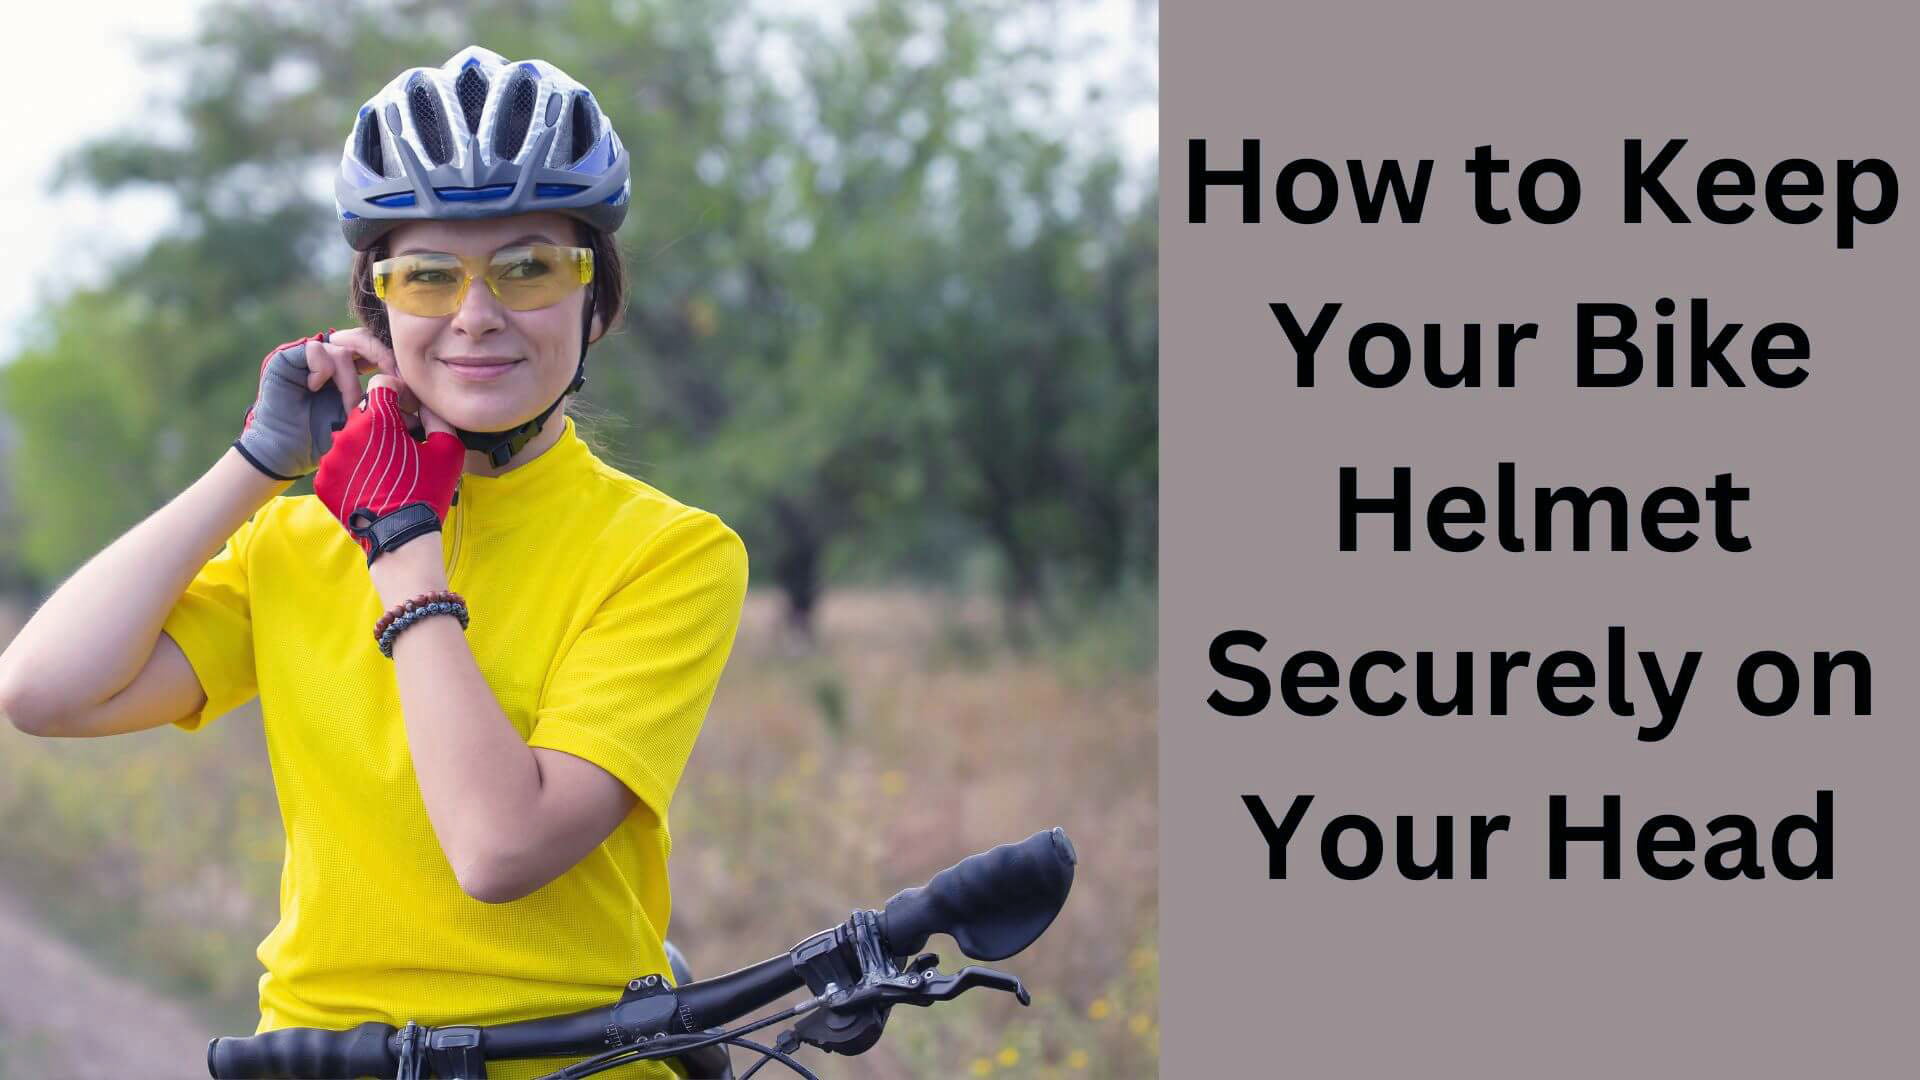 How to Keep Your Bike Helmet Securely on Your Head?